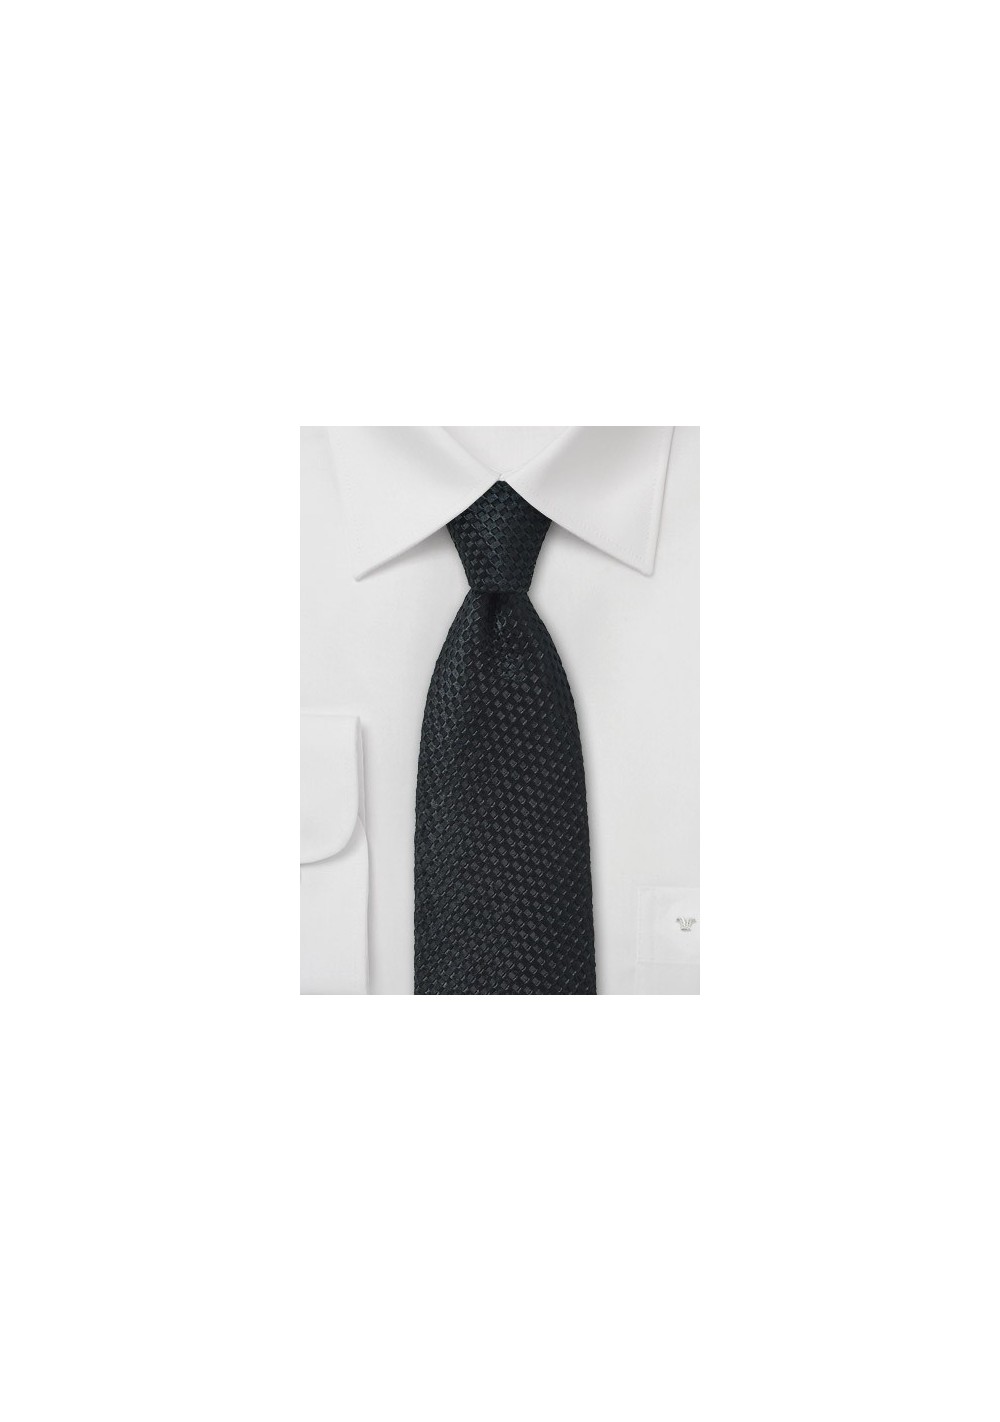 Waffle Cone Textured Tie in Black